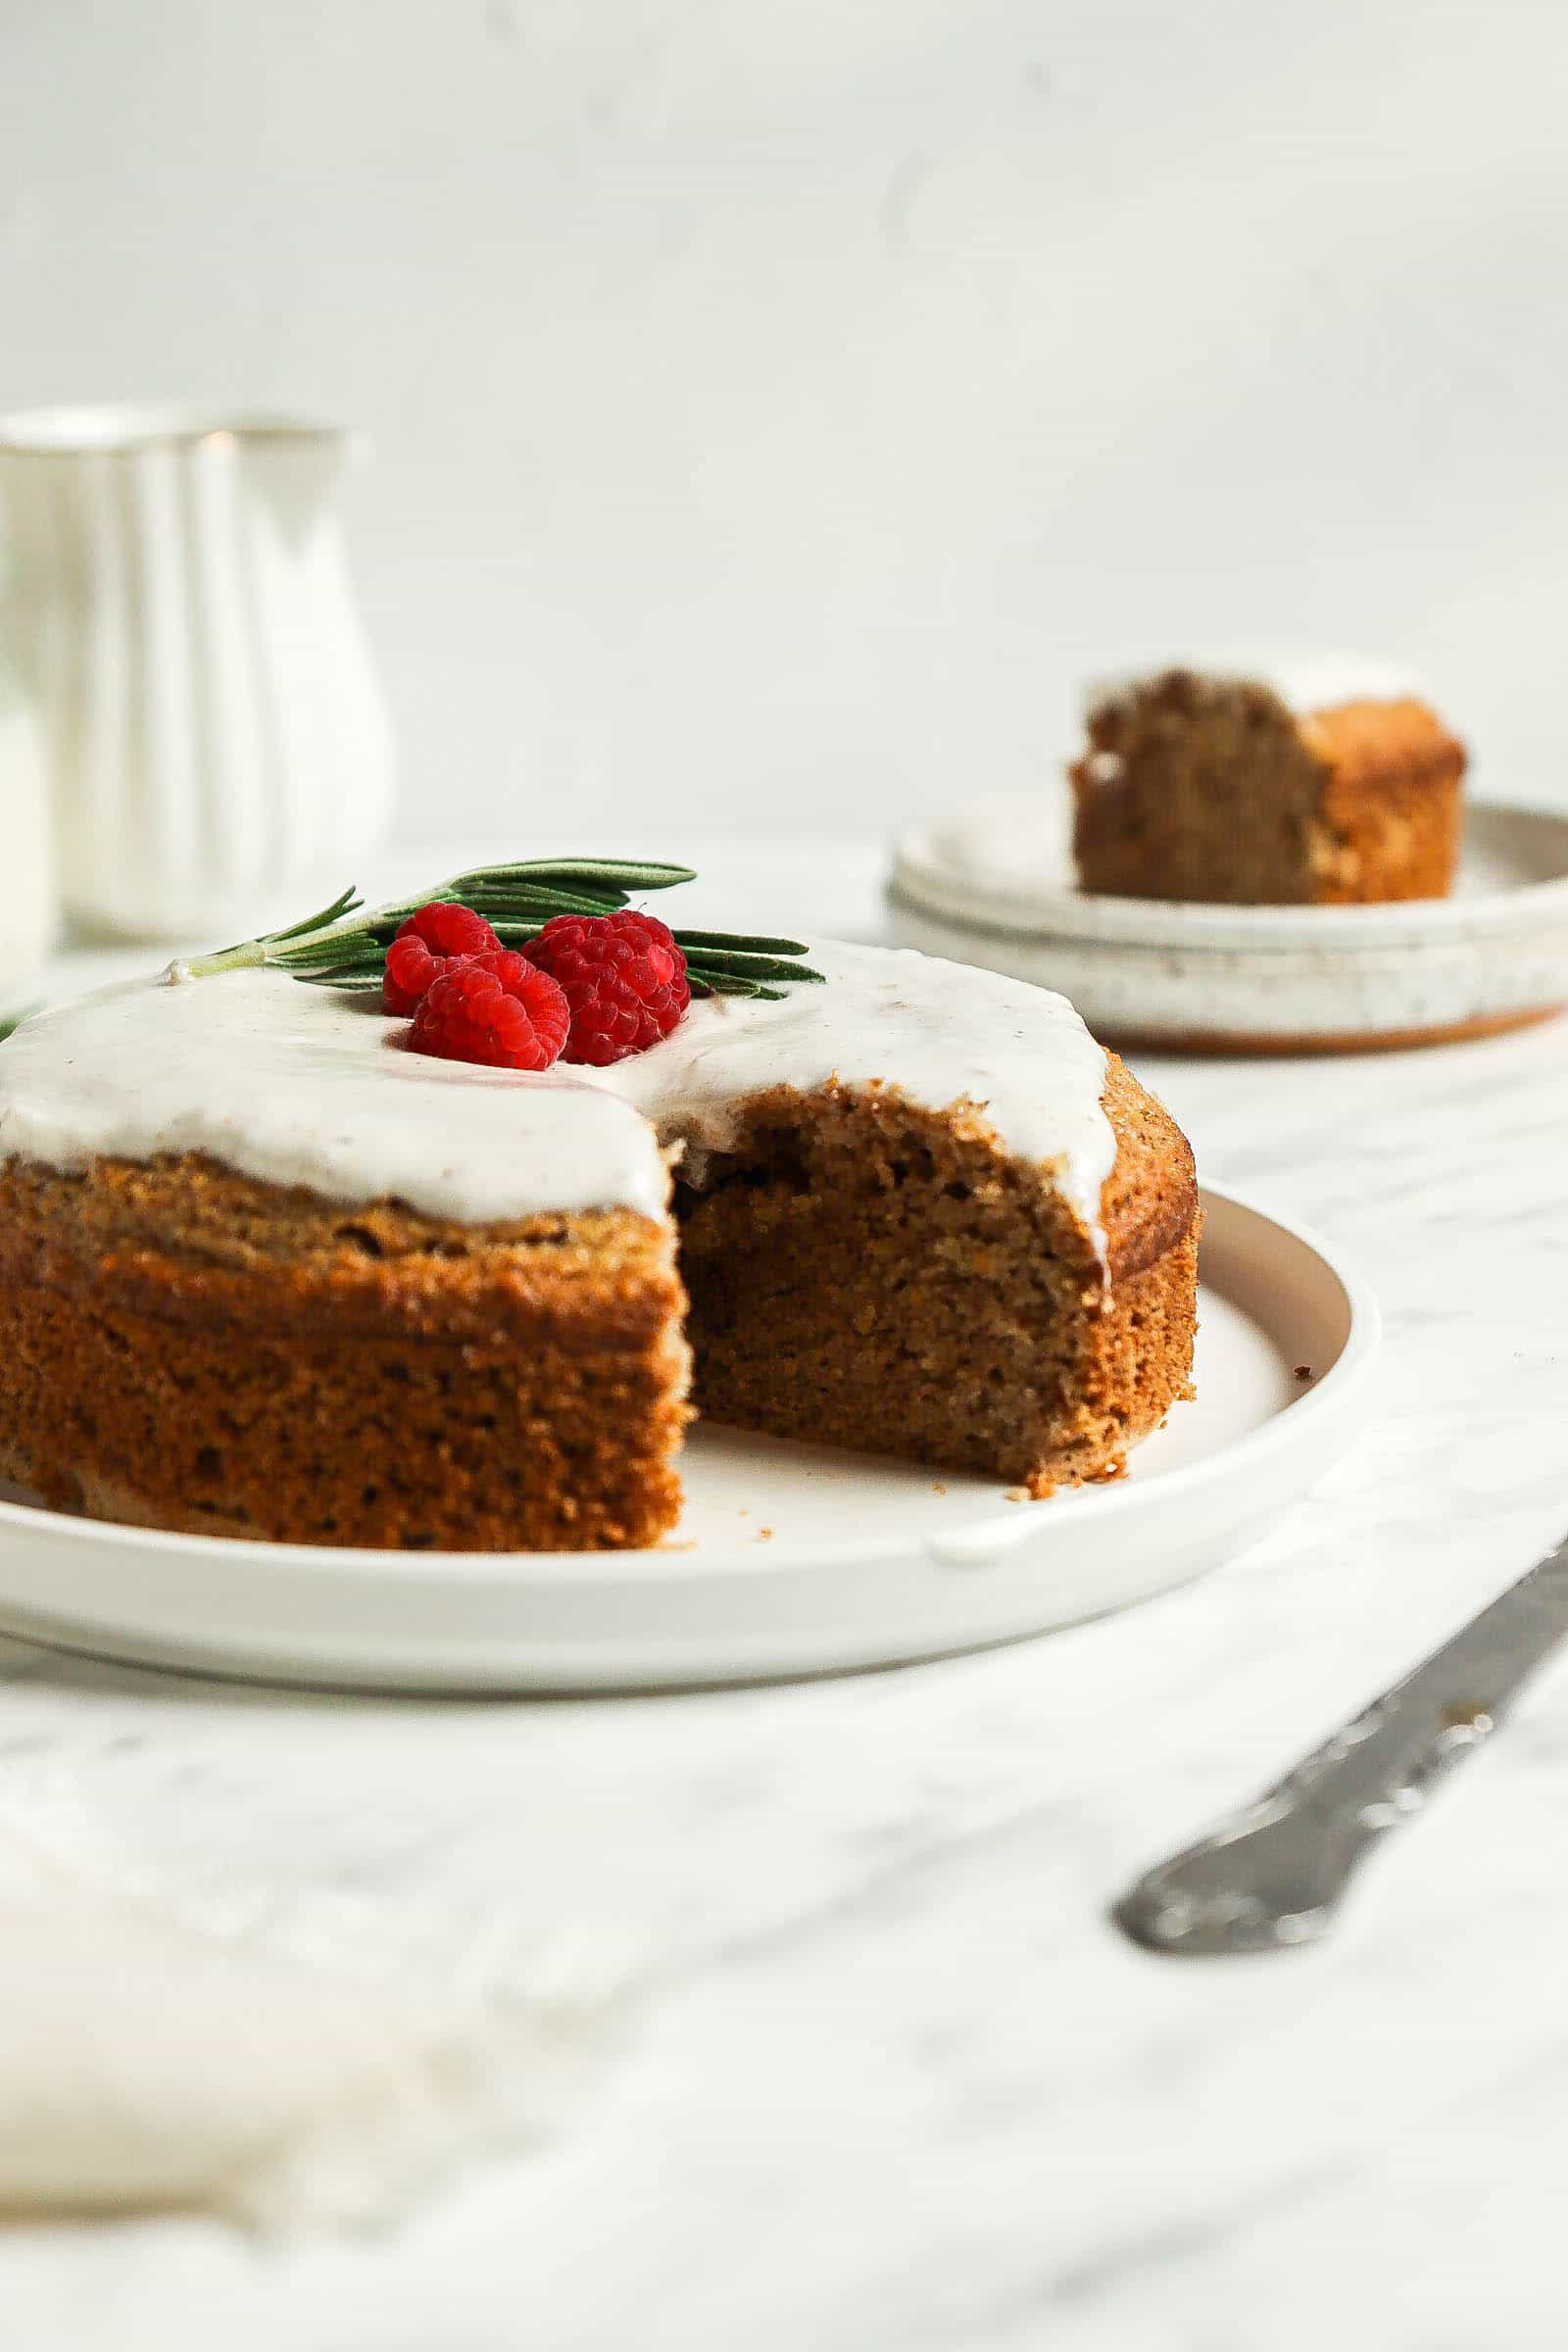 Picture of gingerbread cake on a white plate with berries on top and a slice cut out.